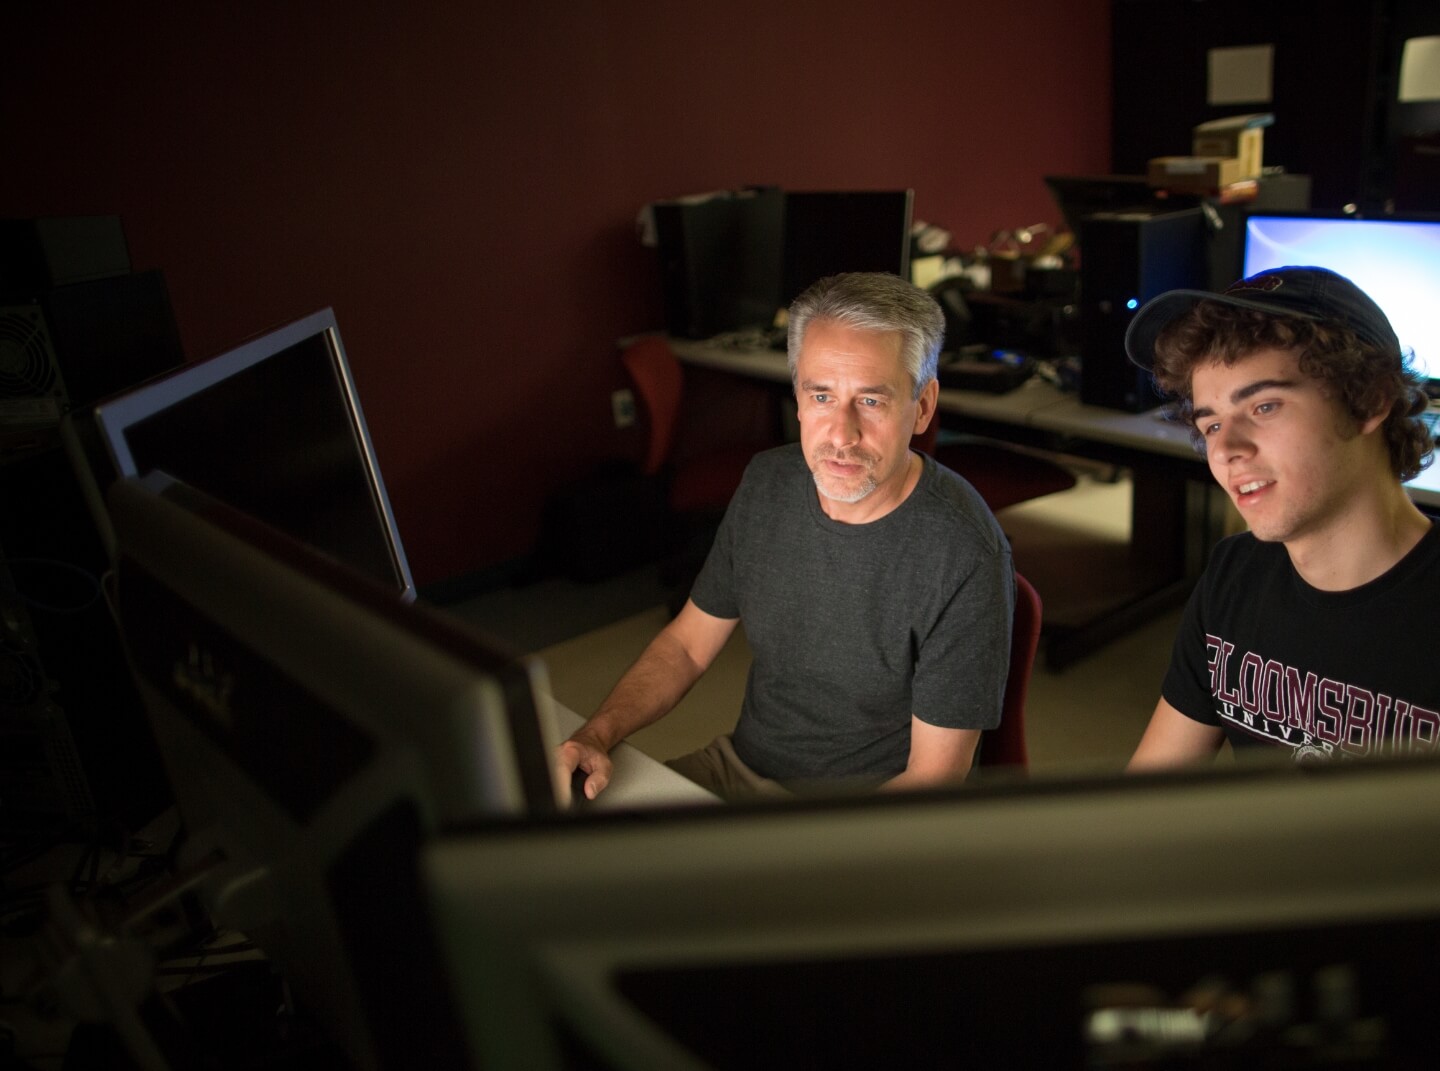 Bloomsburg professor and student sit in front of monitors at an on-campus media editing station